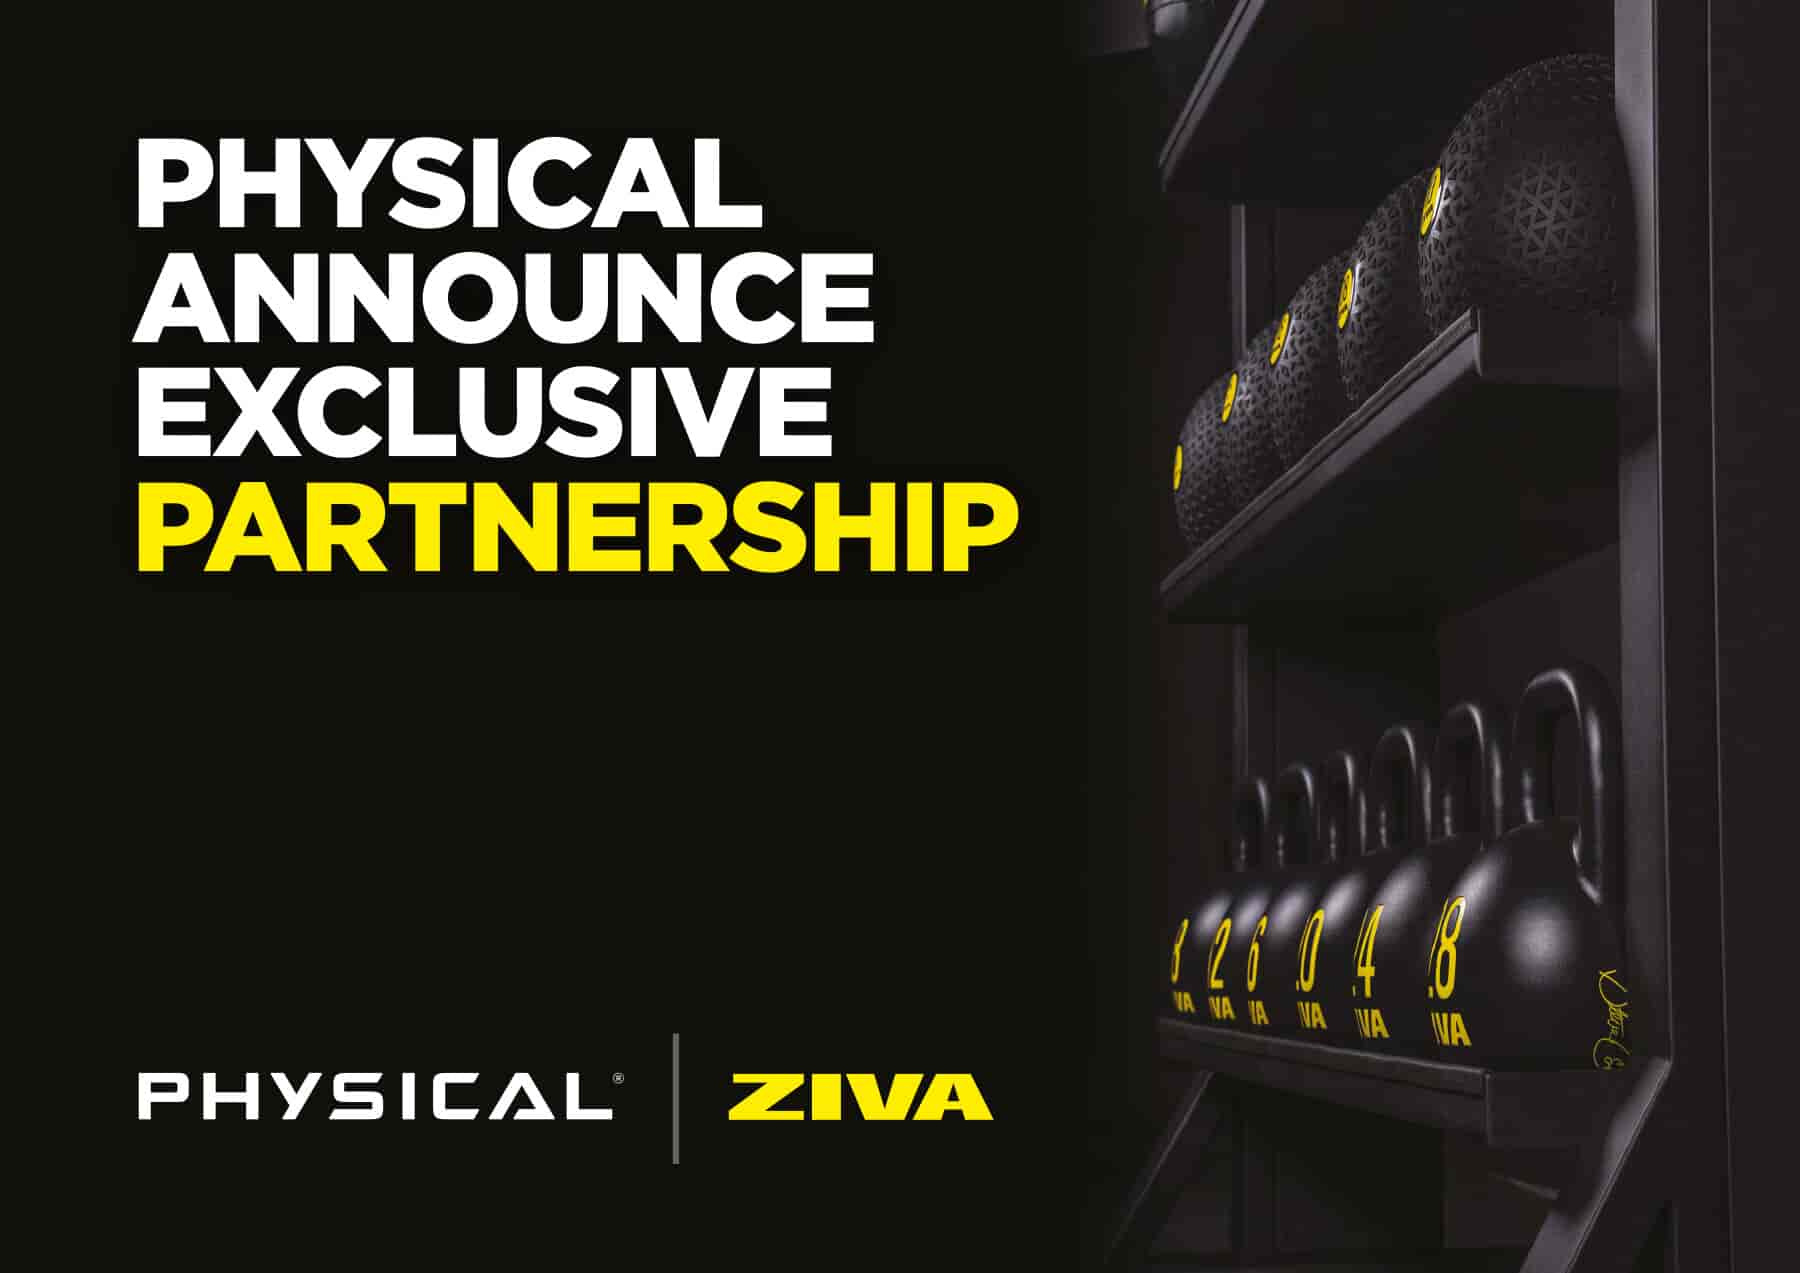 ZIVA & Physical: A new partnership to meet all needs